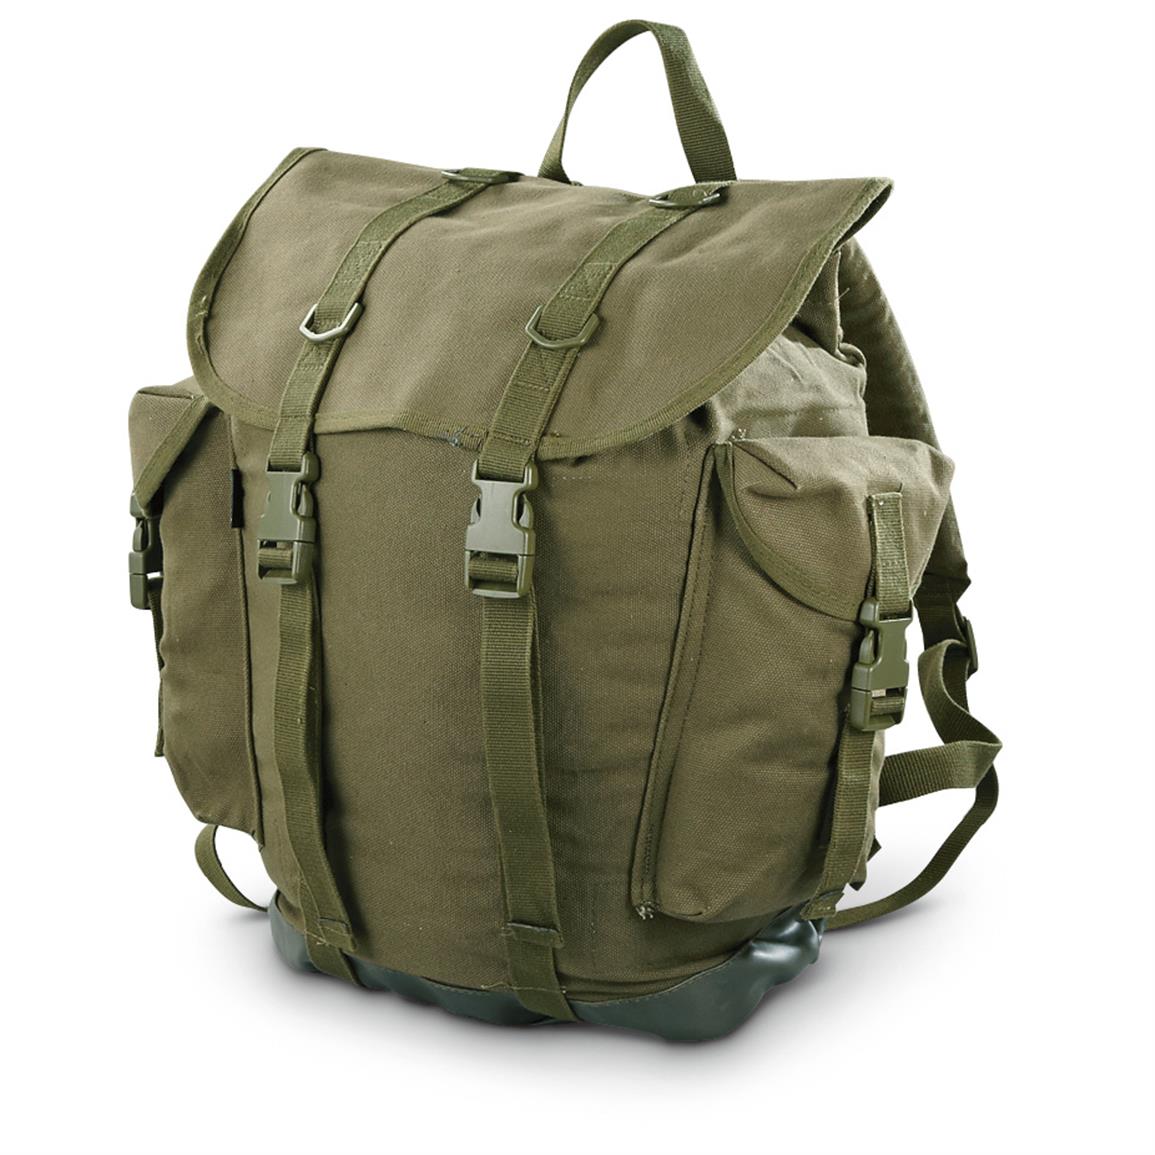 Mil-Tec Canvas Mountain Rucksack - 625268, Military Style Backpacks ...